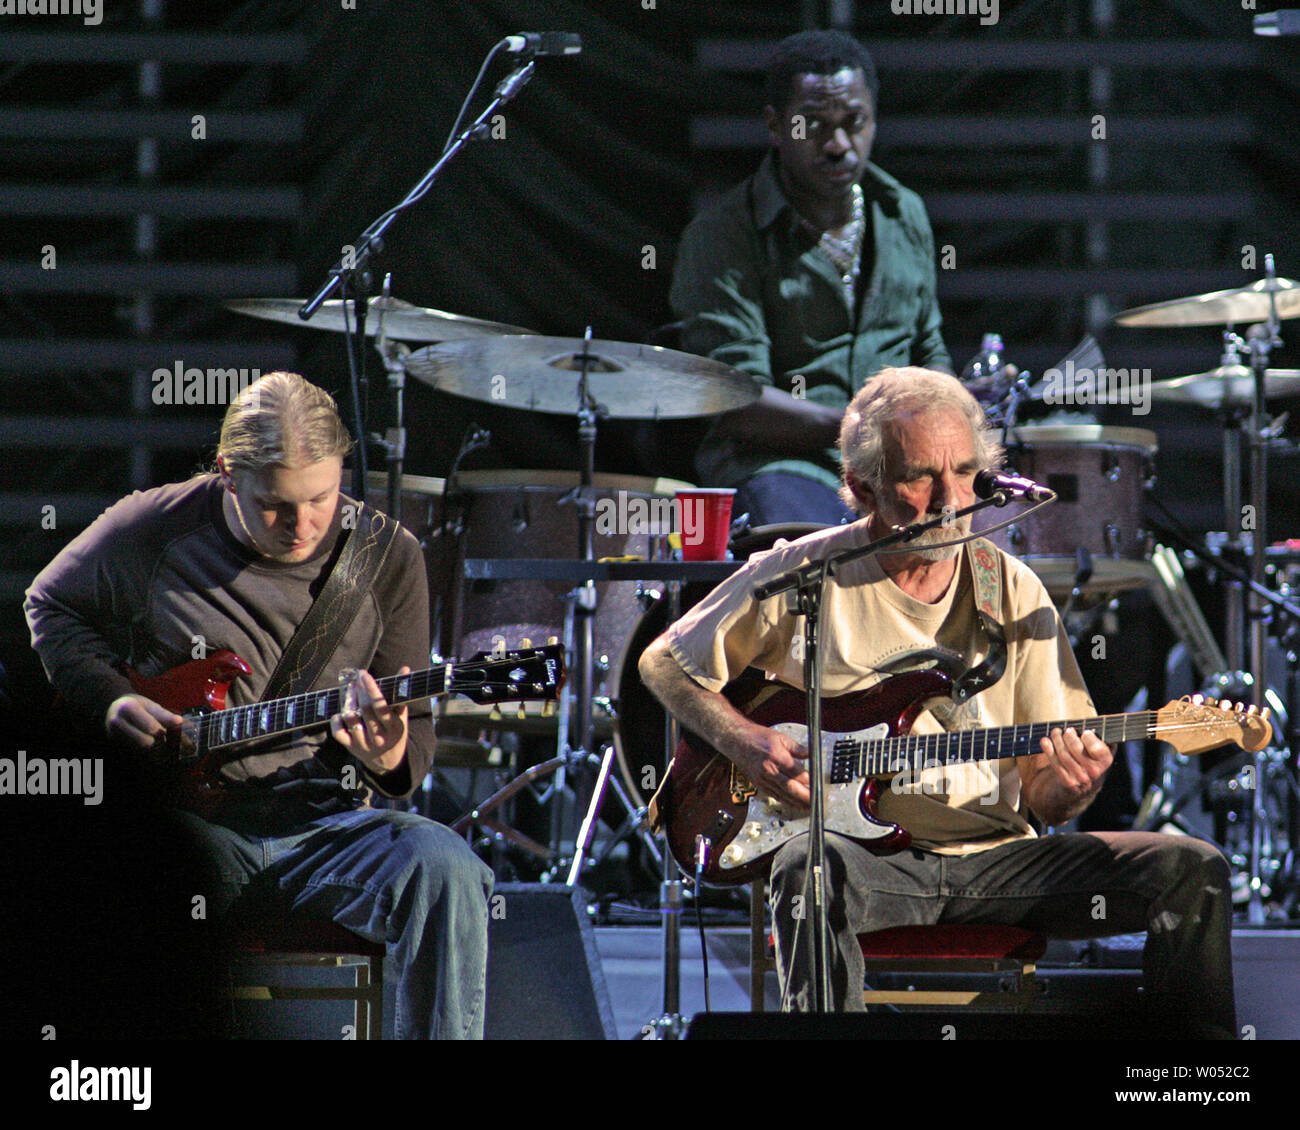 Derek Trucks, drummer Steve Jordan, and J.J. Cale (L-R) perform in concert with Eric Clapton at the ipayOne Center in San Diego on March 15, 2007.   (UPI Photo/Roger Williams) Stock Photo